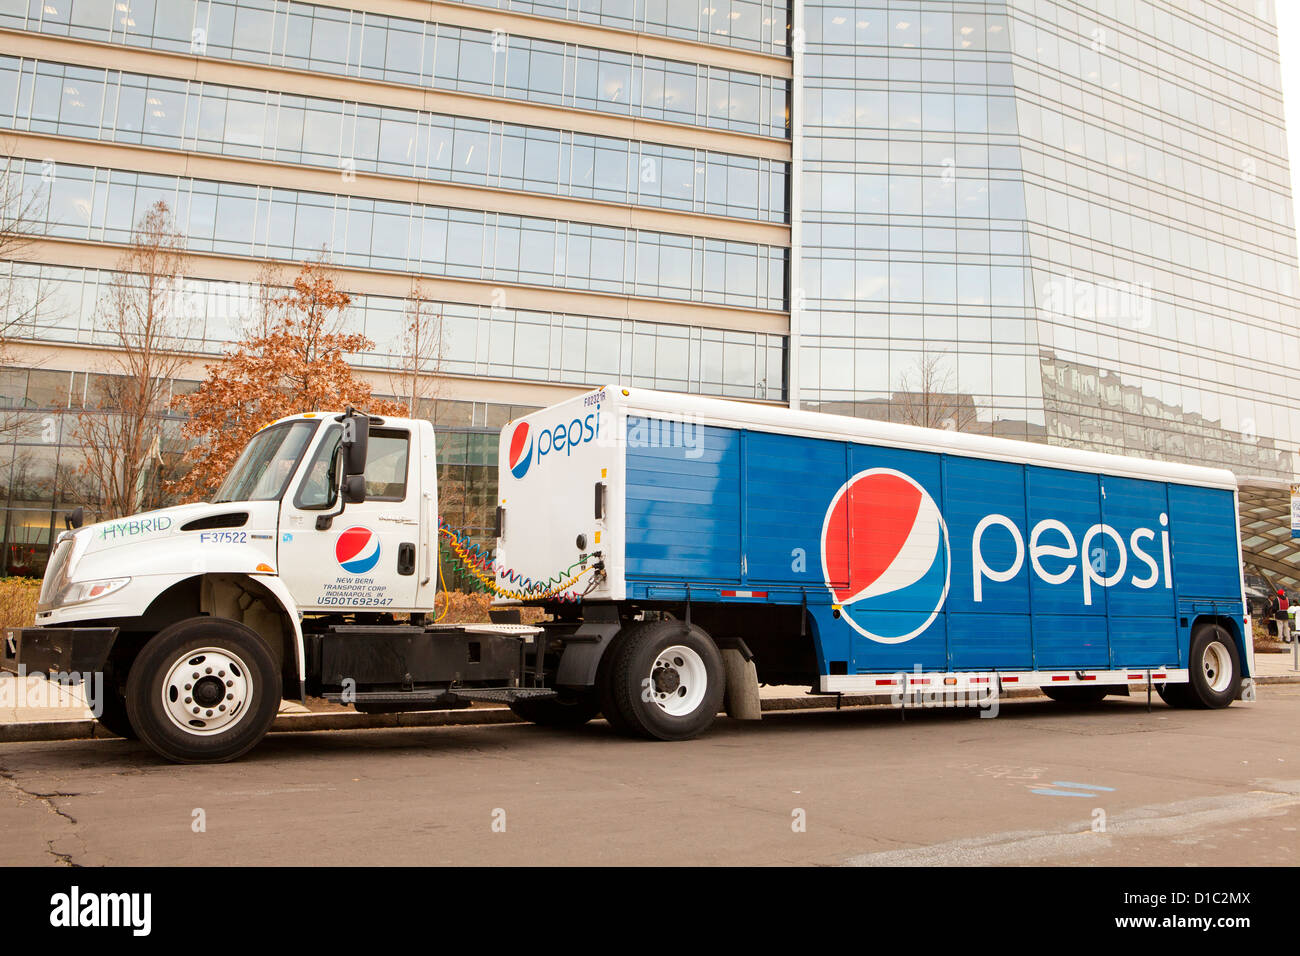 Pepsi Cola delivery truck in front of building Stock Photo